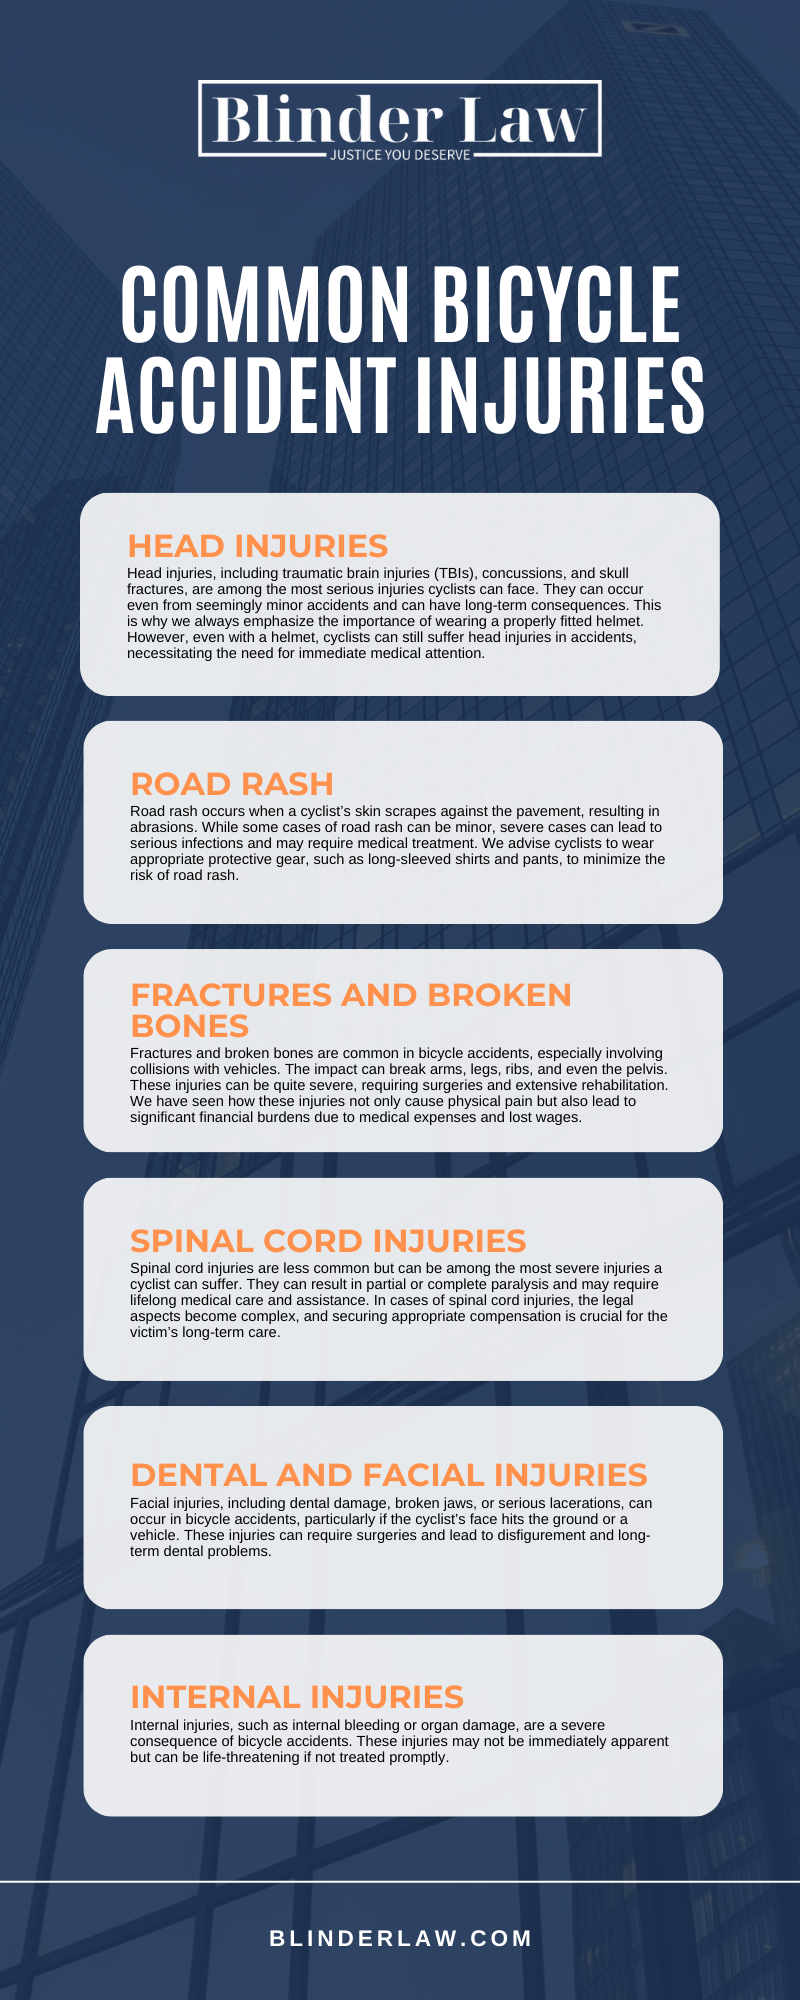 Common Bicycle Accident Injuries Infographic